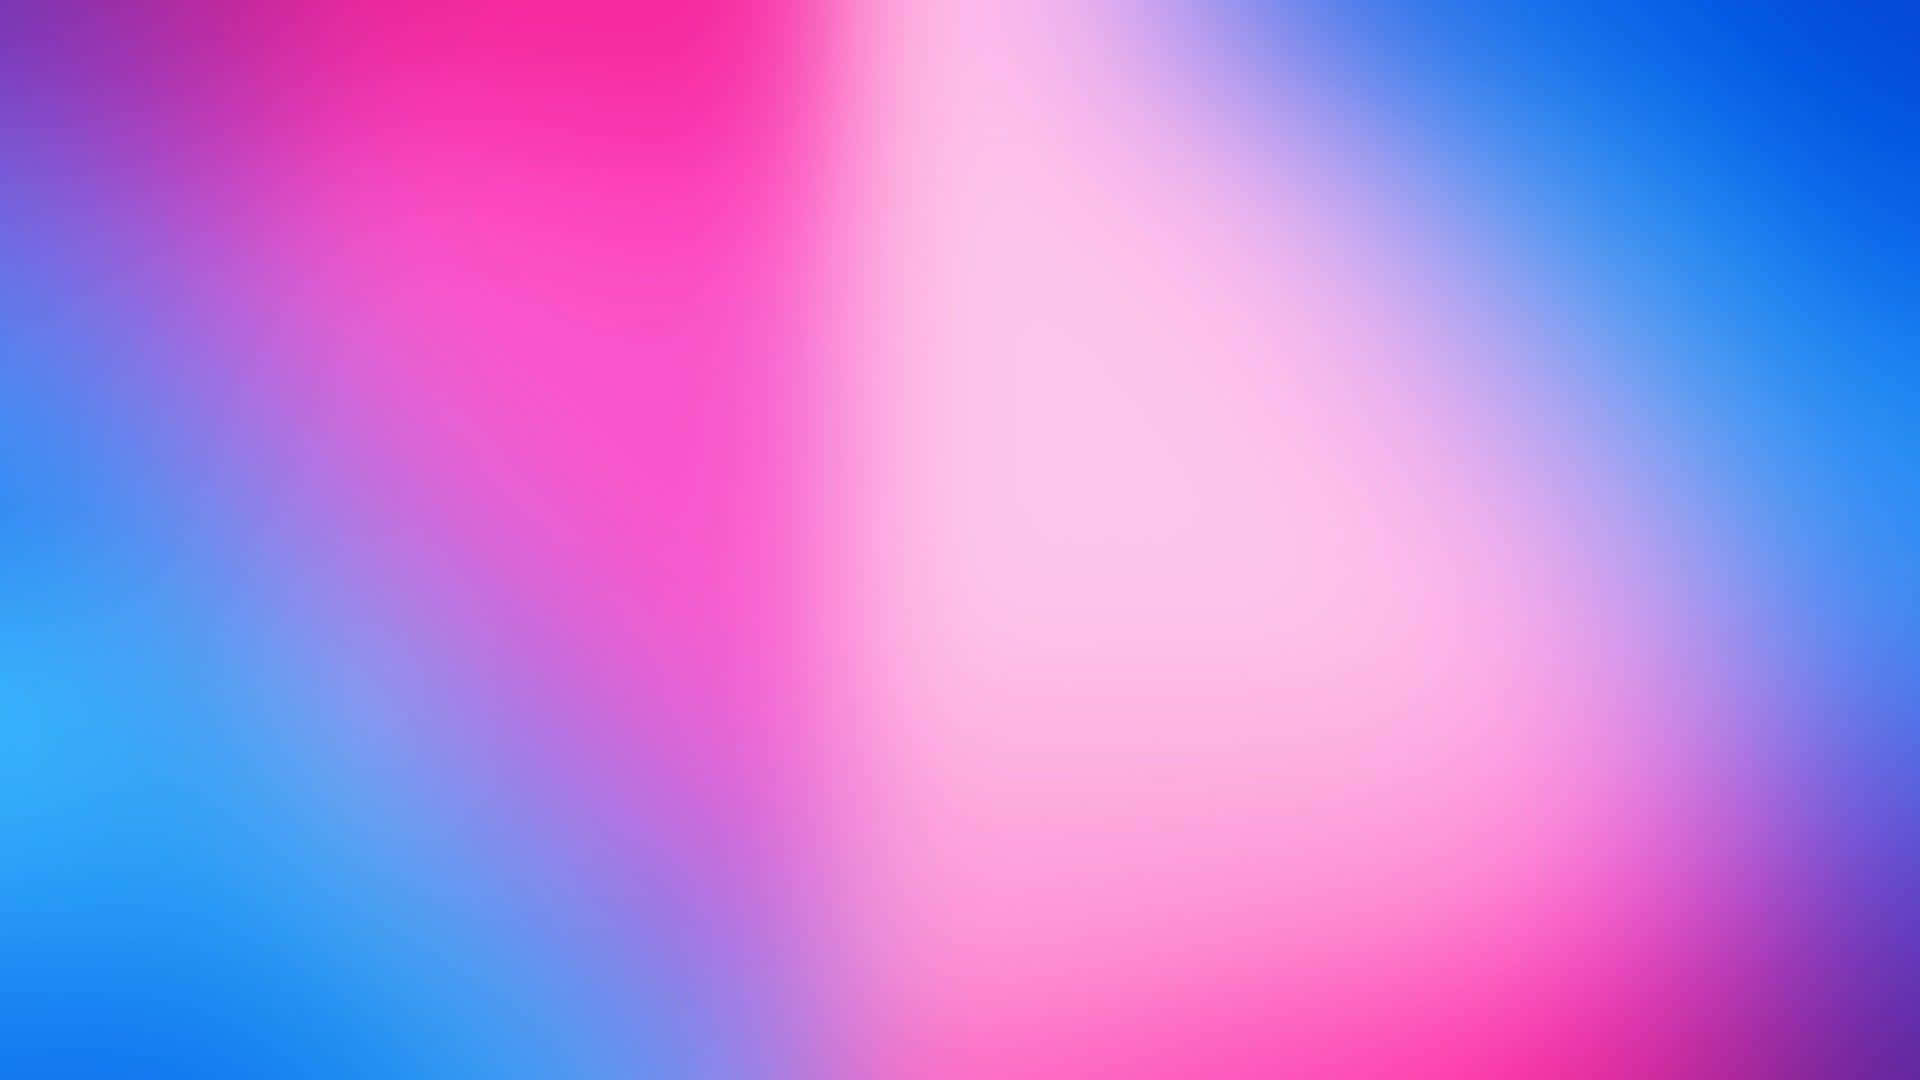 a blurred background with pink and blue colors